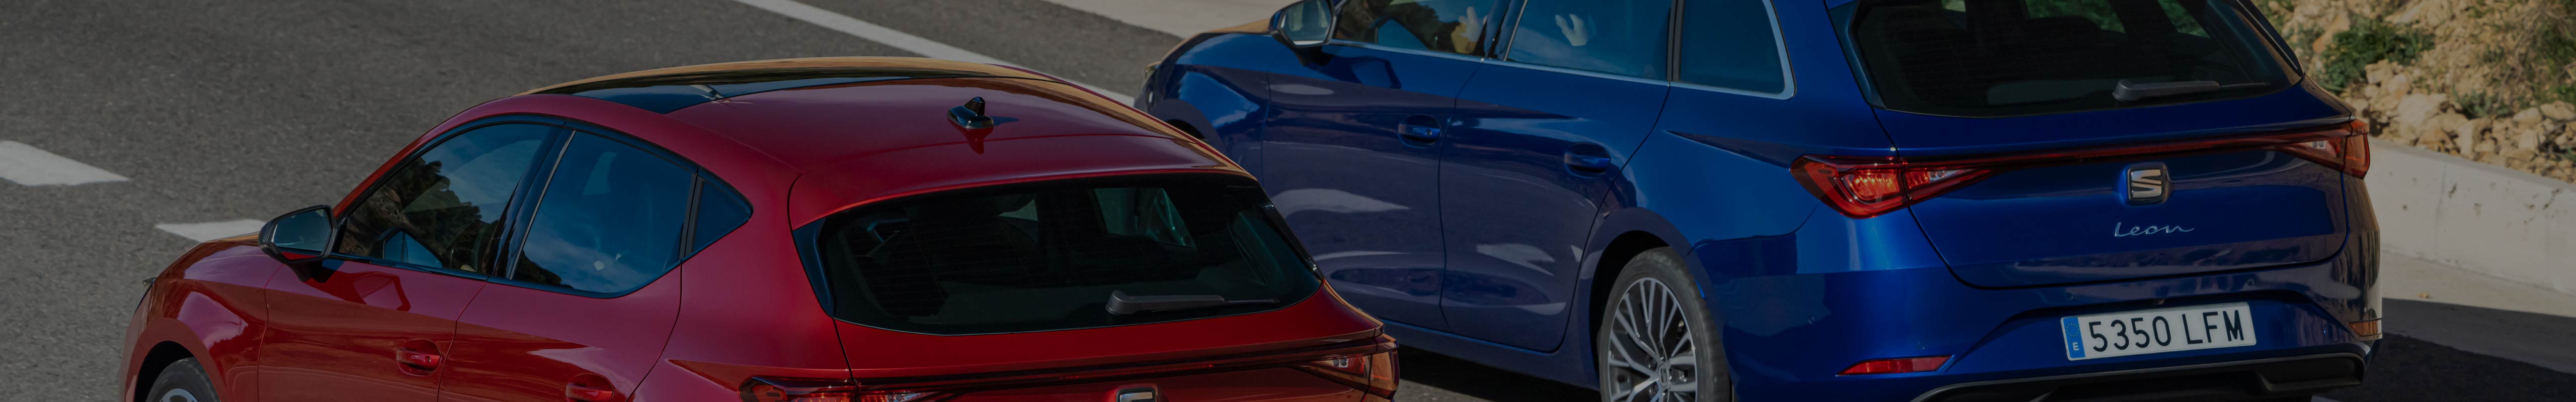 Two SEAT Leon on the road in red and blue colour.